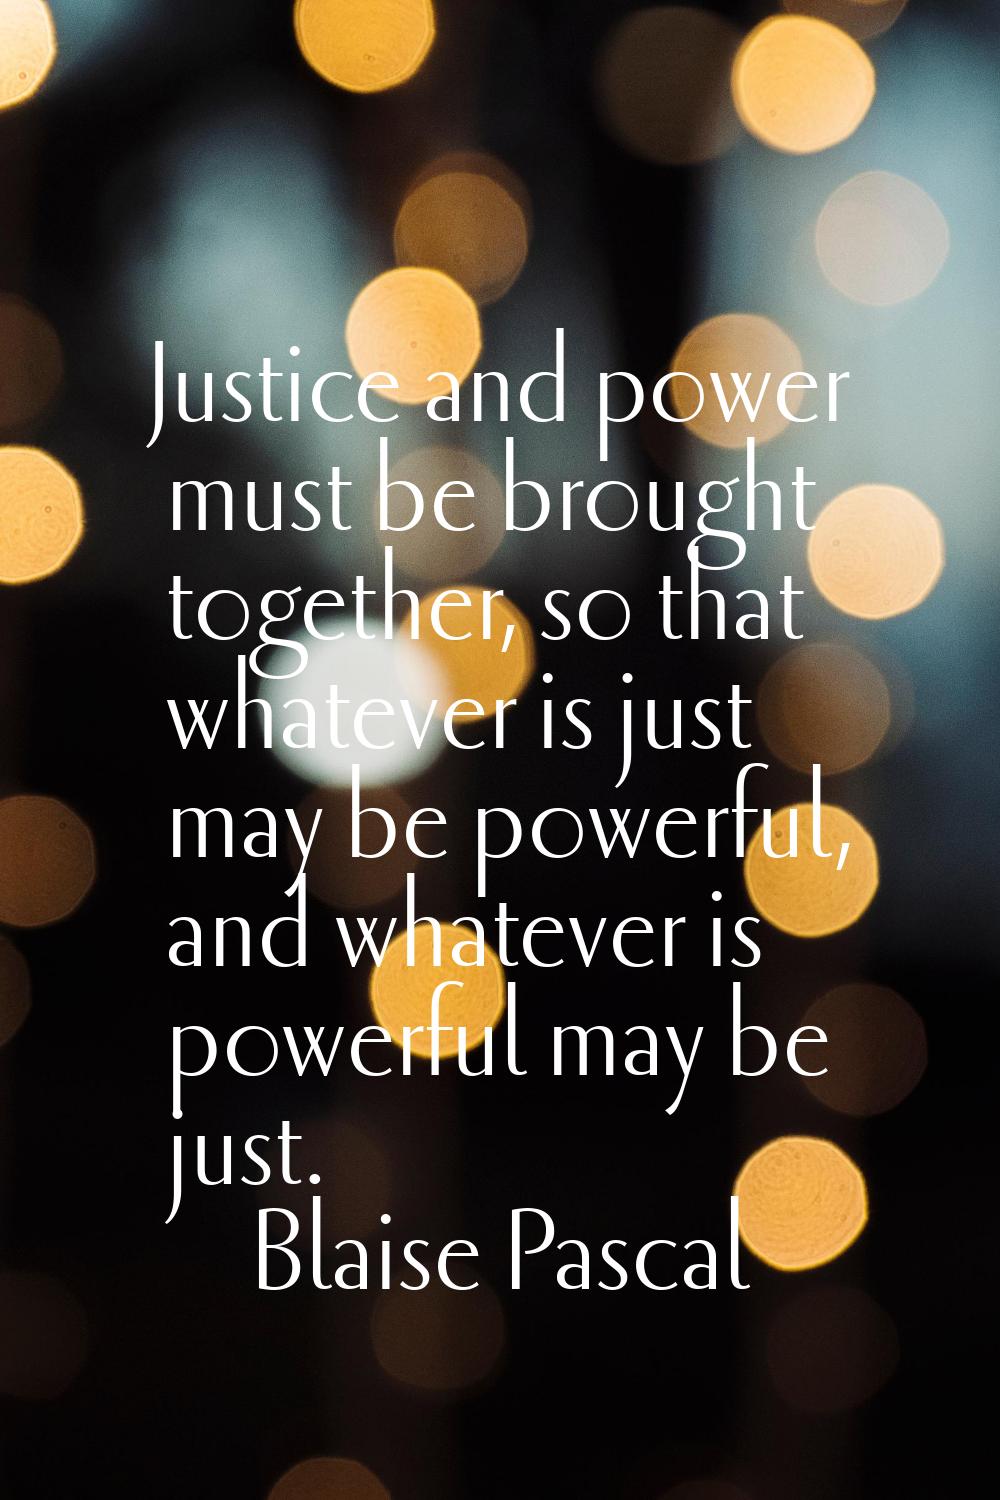 Justice and power must be brought together, so that whatever is just may be powerful, and whatever 